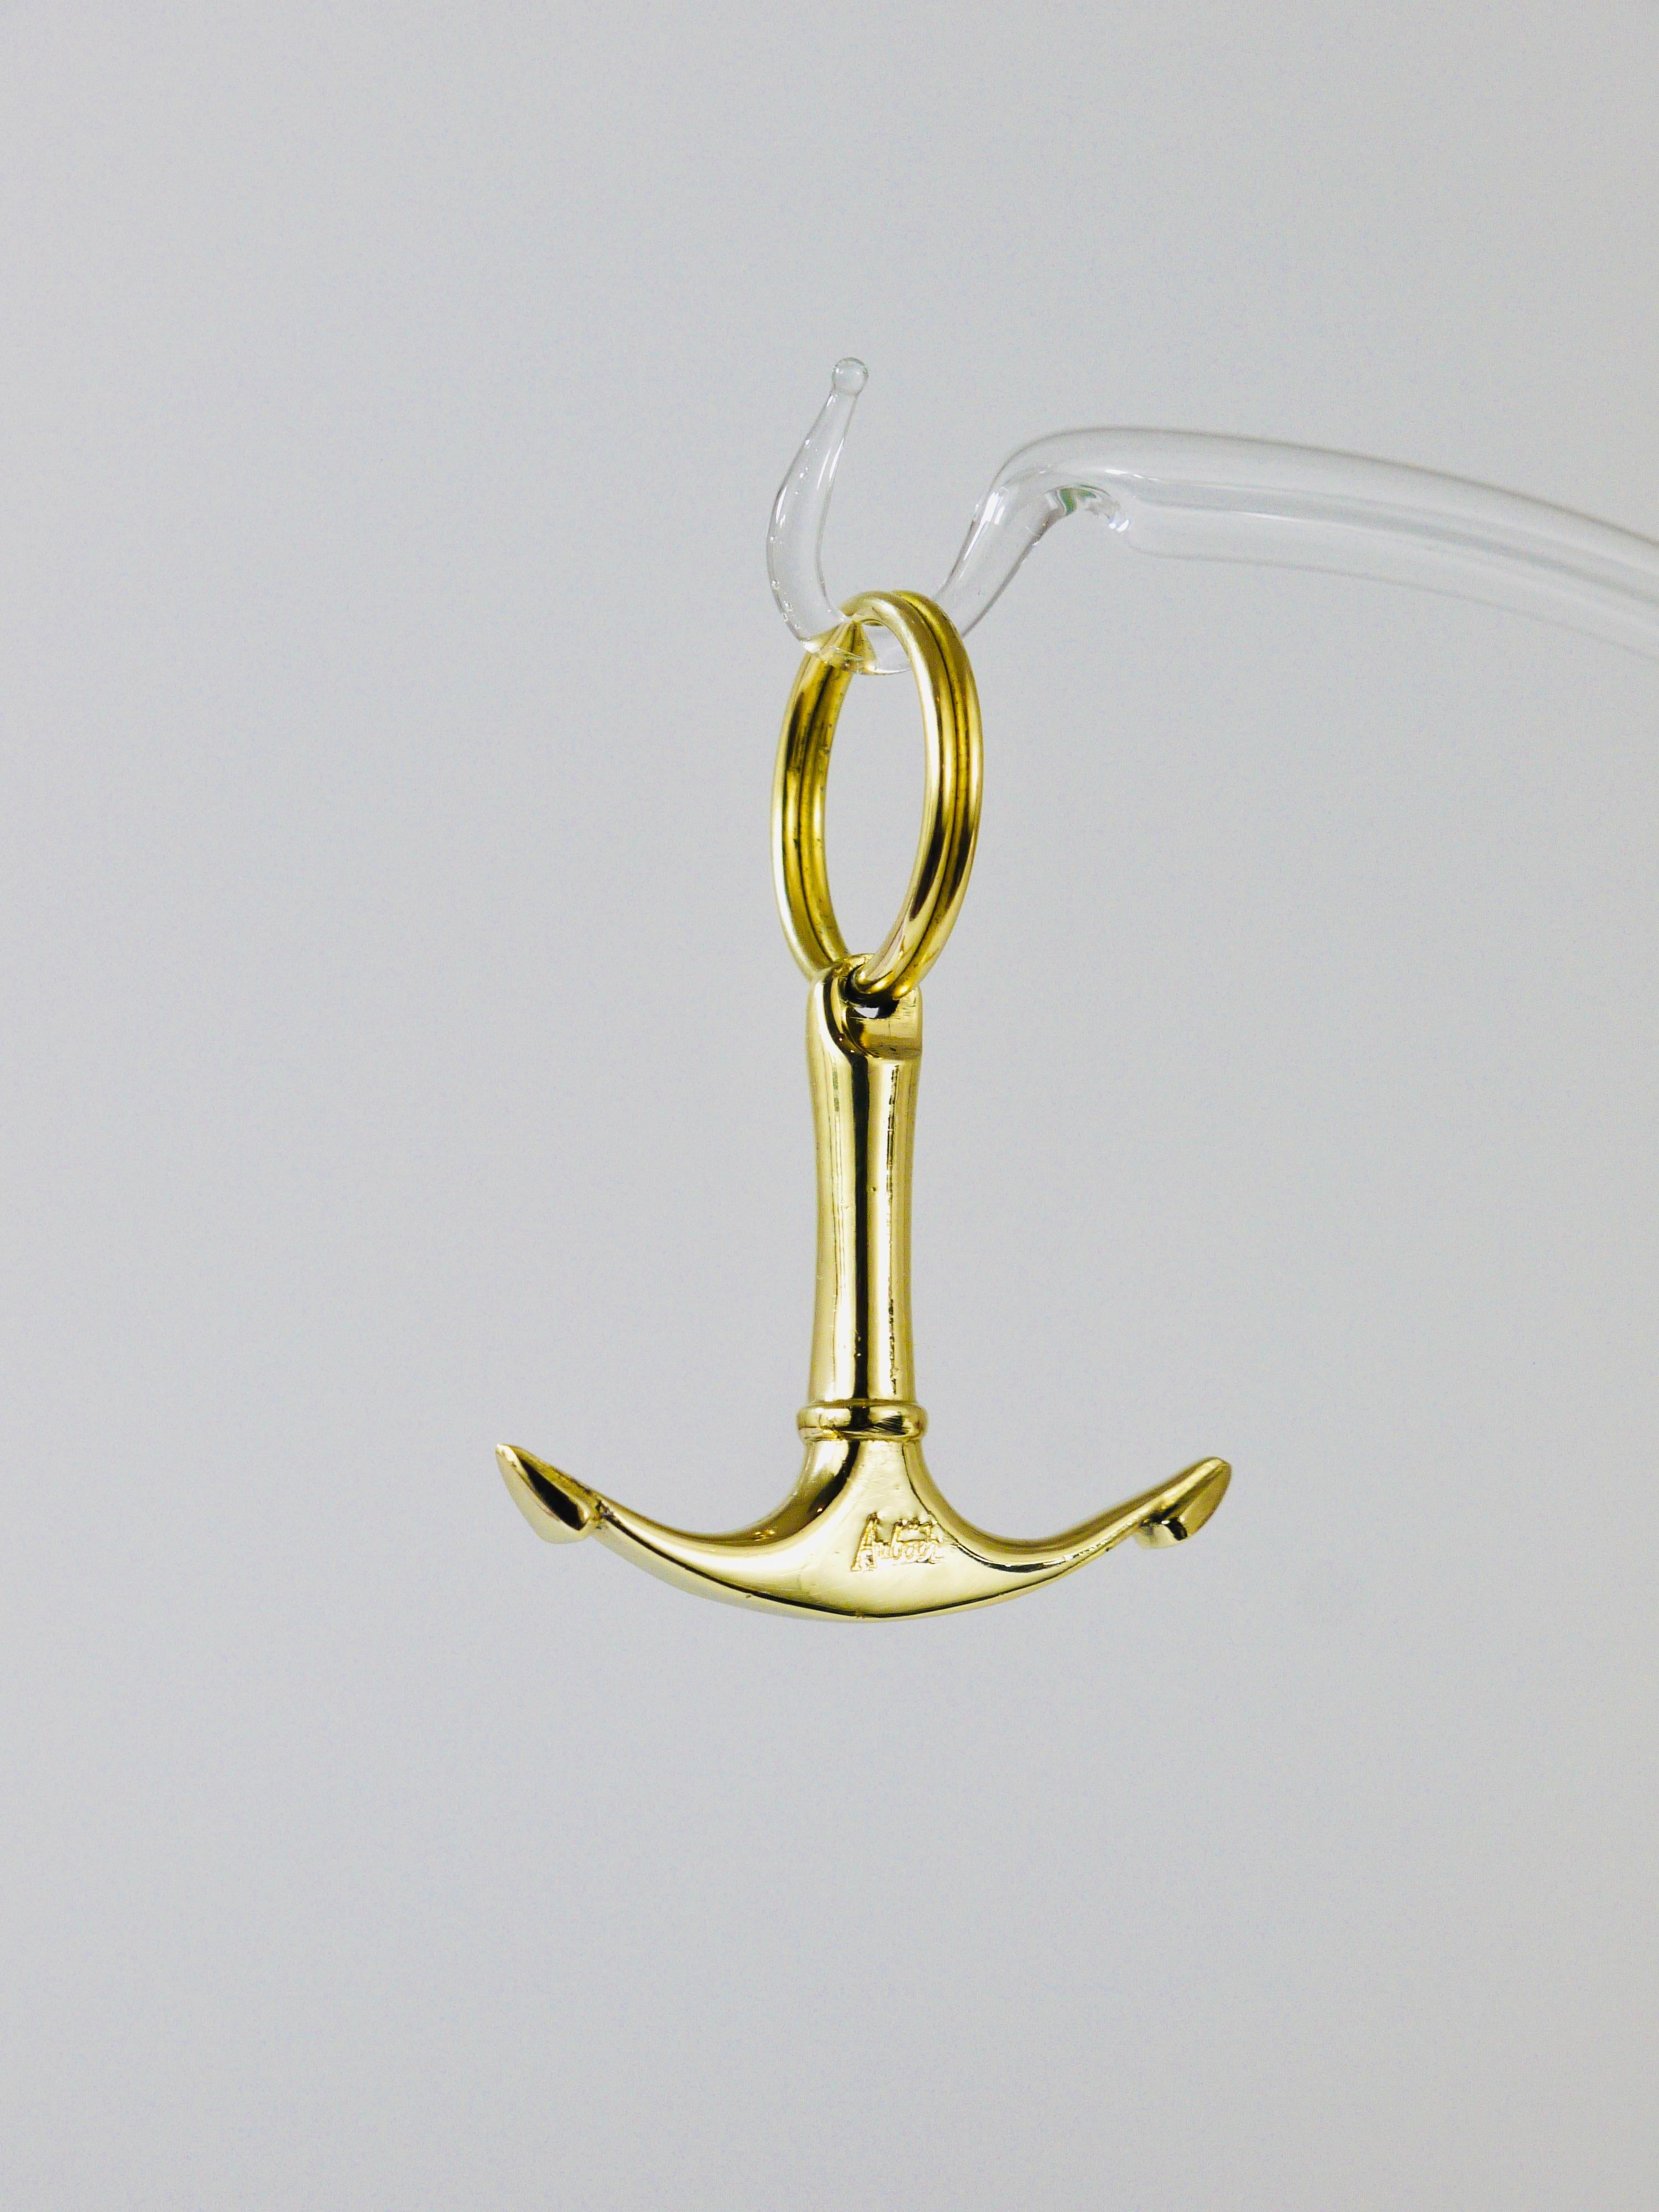 Polished Carl Auböck Handcrafted Midcentury Brass Anchor Figurine Key Ring Chain Holder For Sale